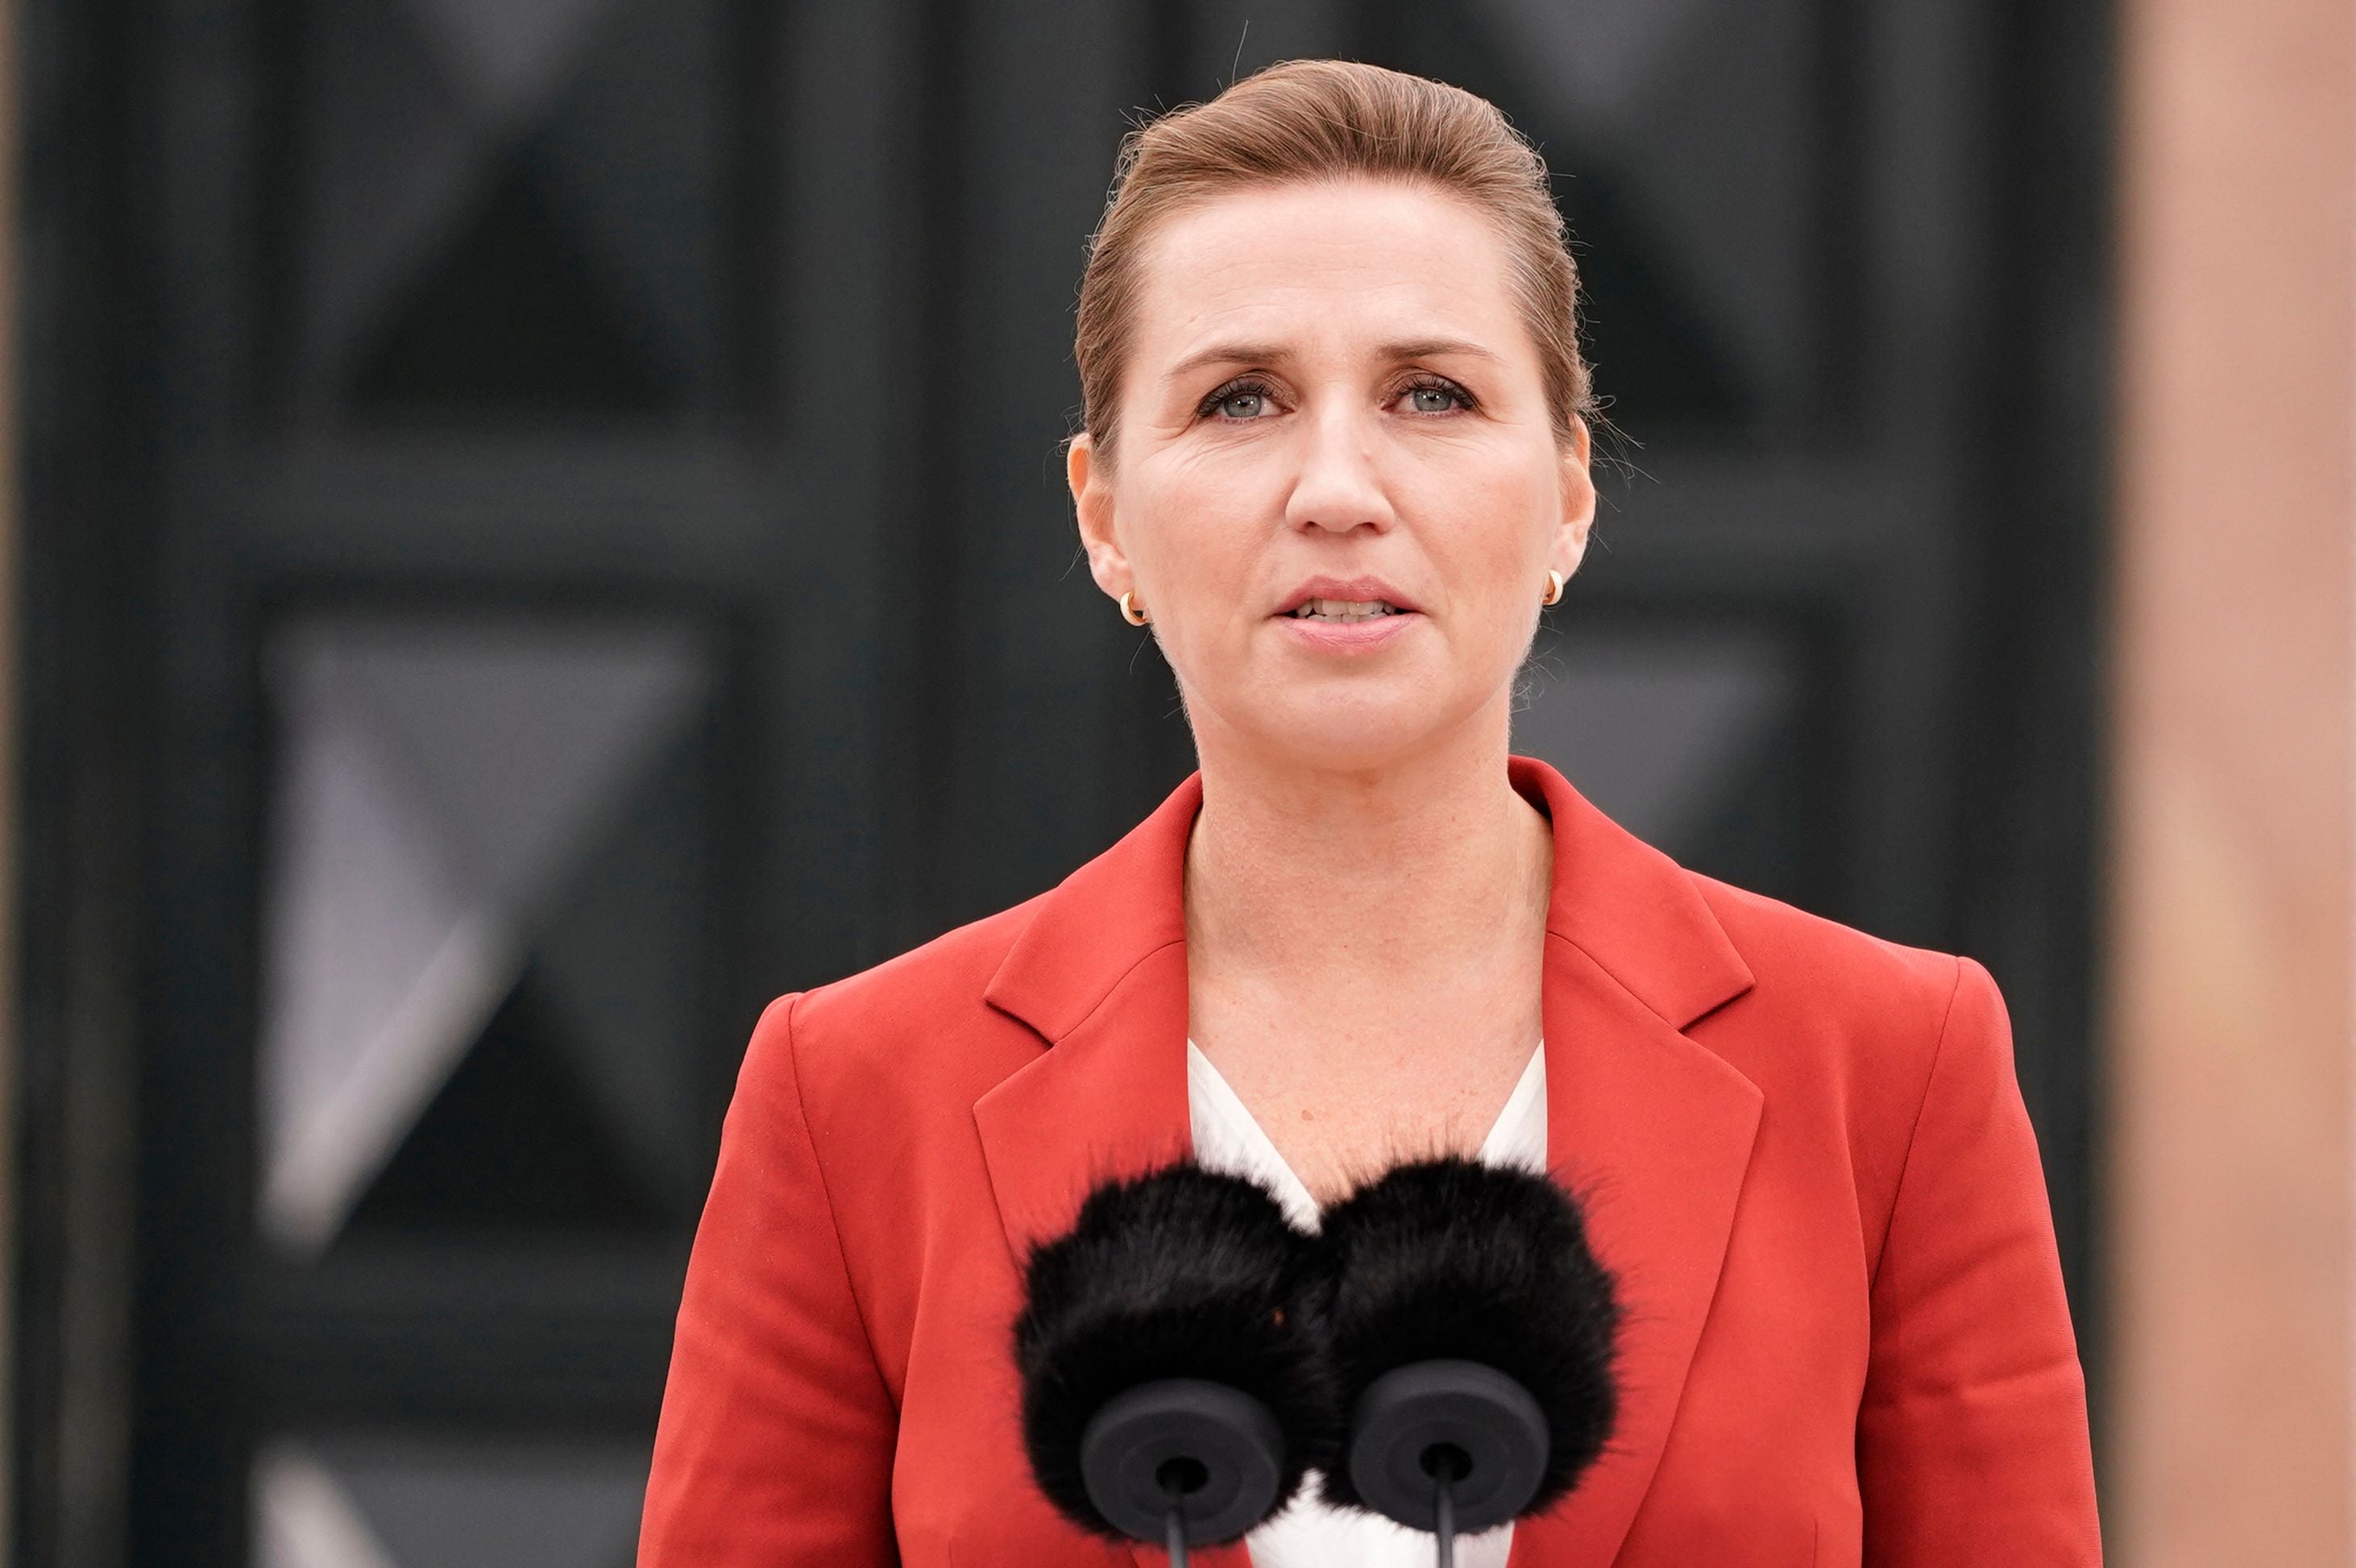 Mette Frederiksen called for a general election to be held 1 November